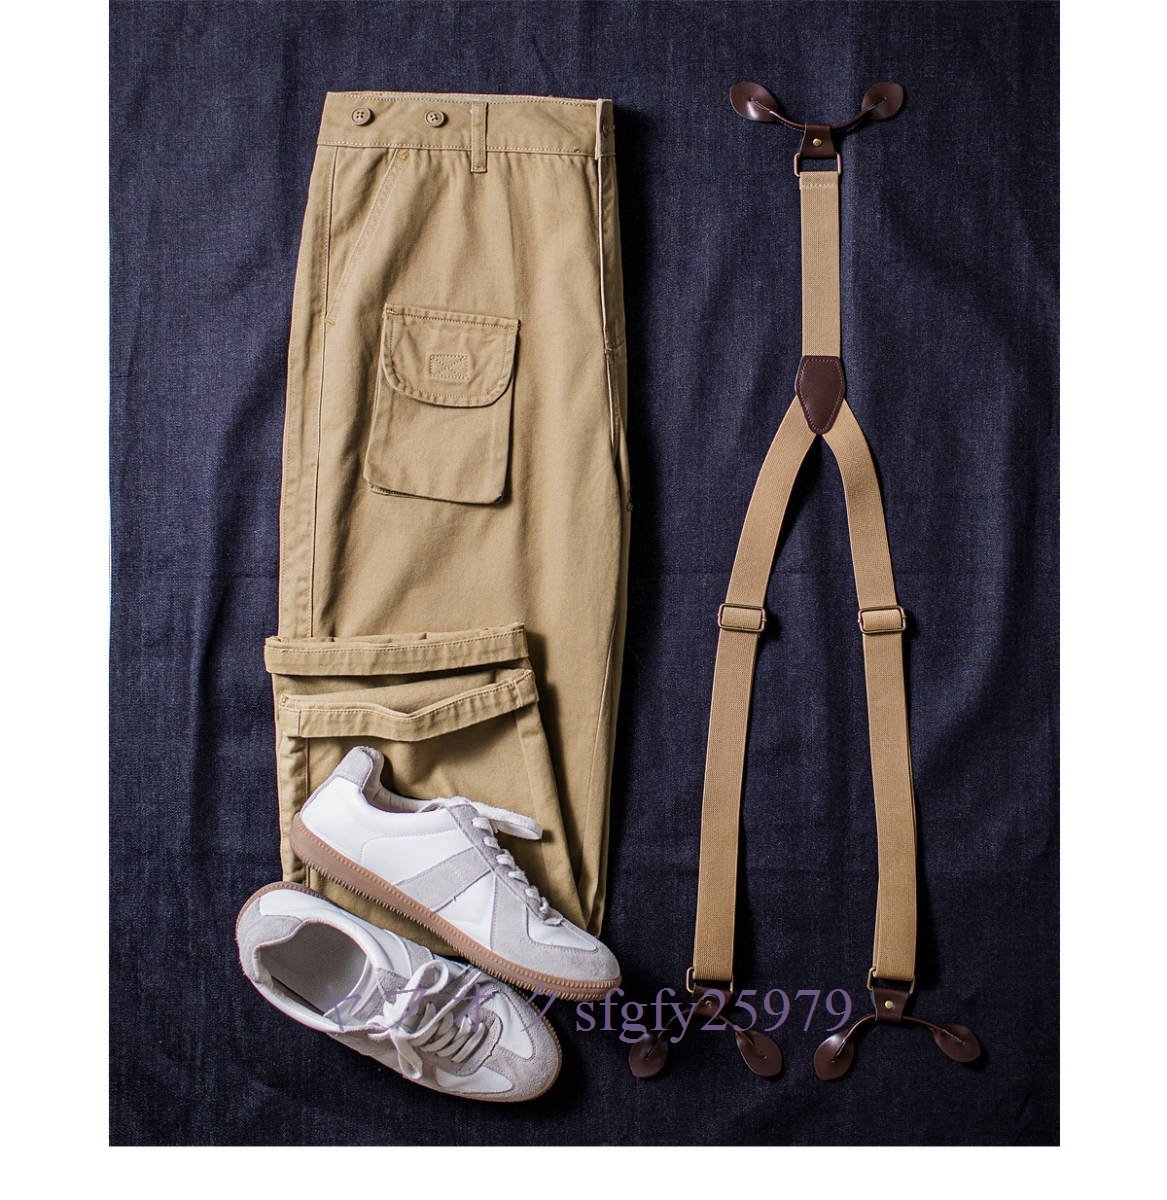 P936 new goods men's military Vintage reissue style cotton suspenders over pants chinoM~3XL suspenders attaching 